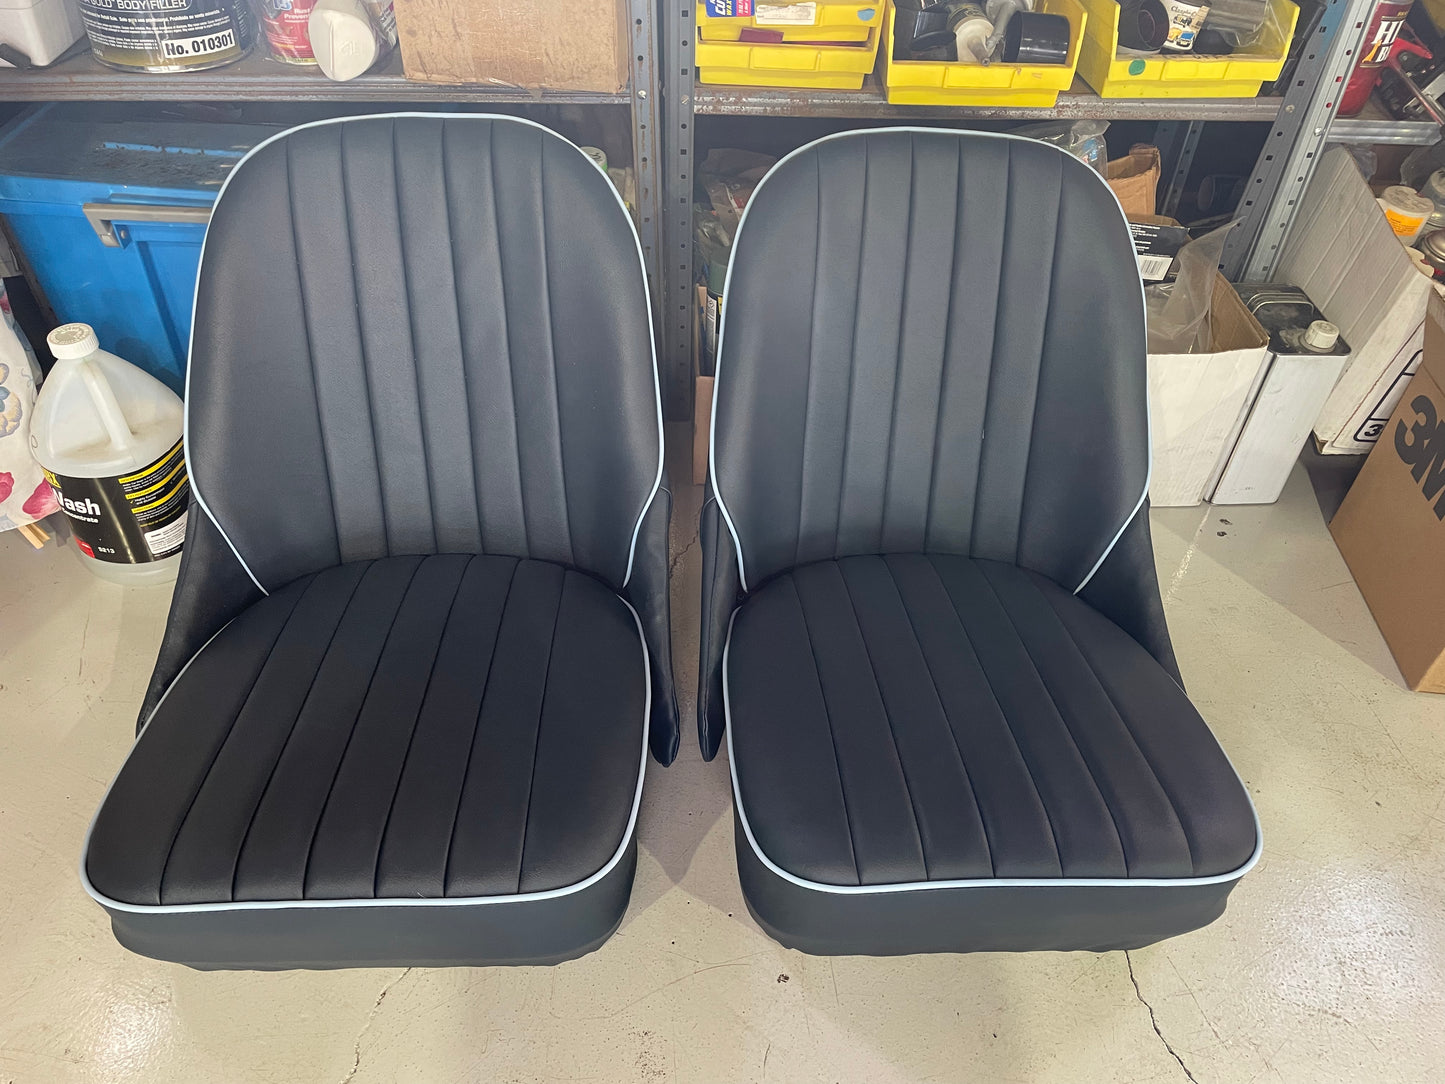 Pair of Complete Upholstered Bugeye Seats with All New Parts